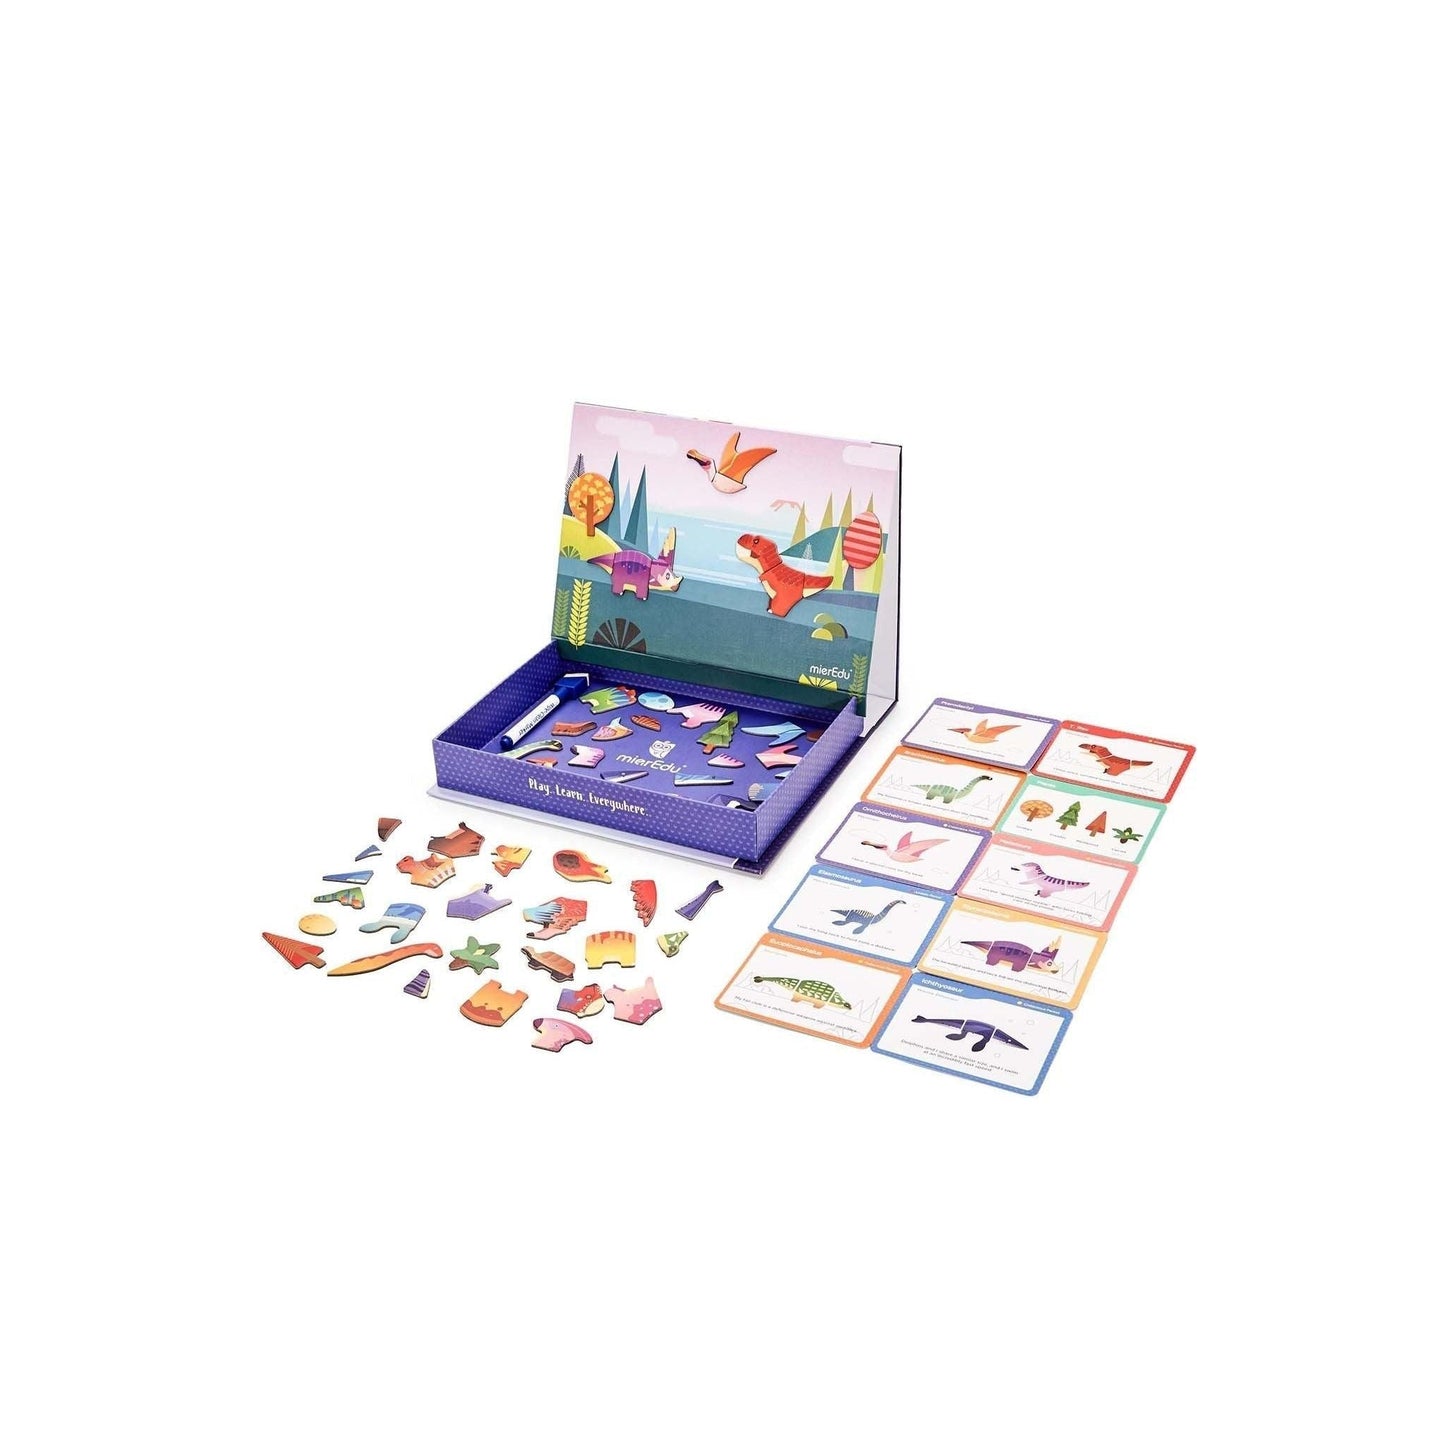 Magnetic Art Case - Dino World - Toybox Tales